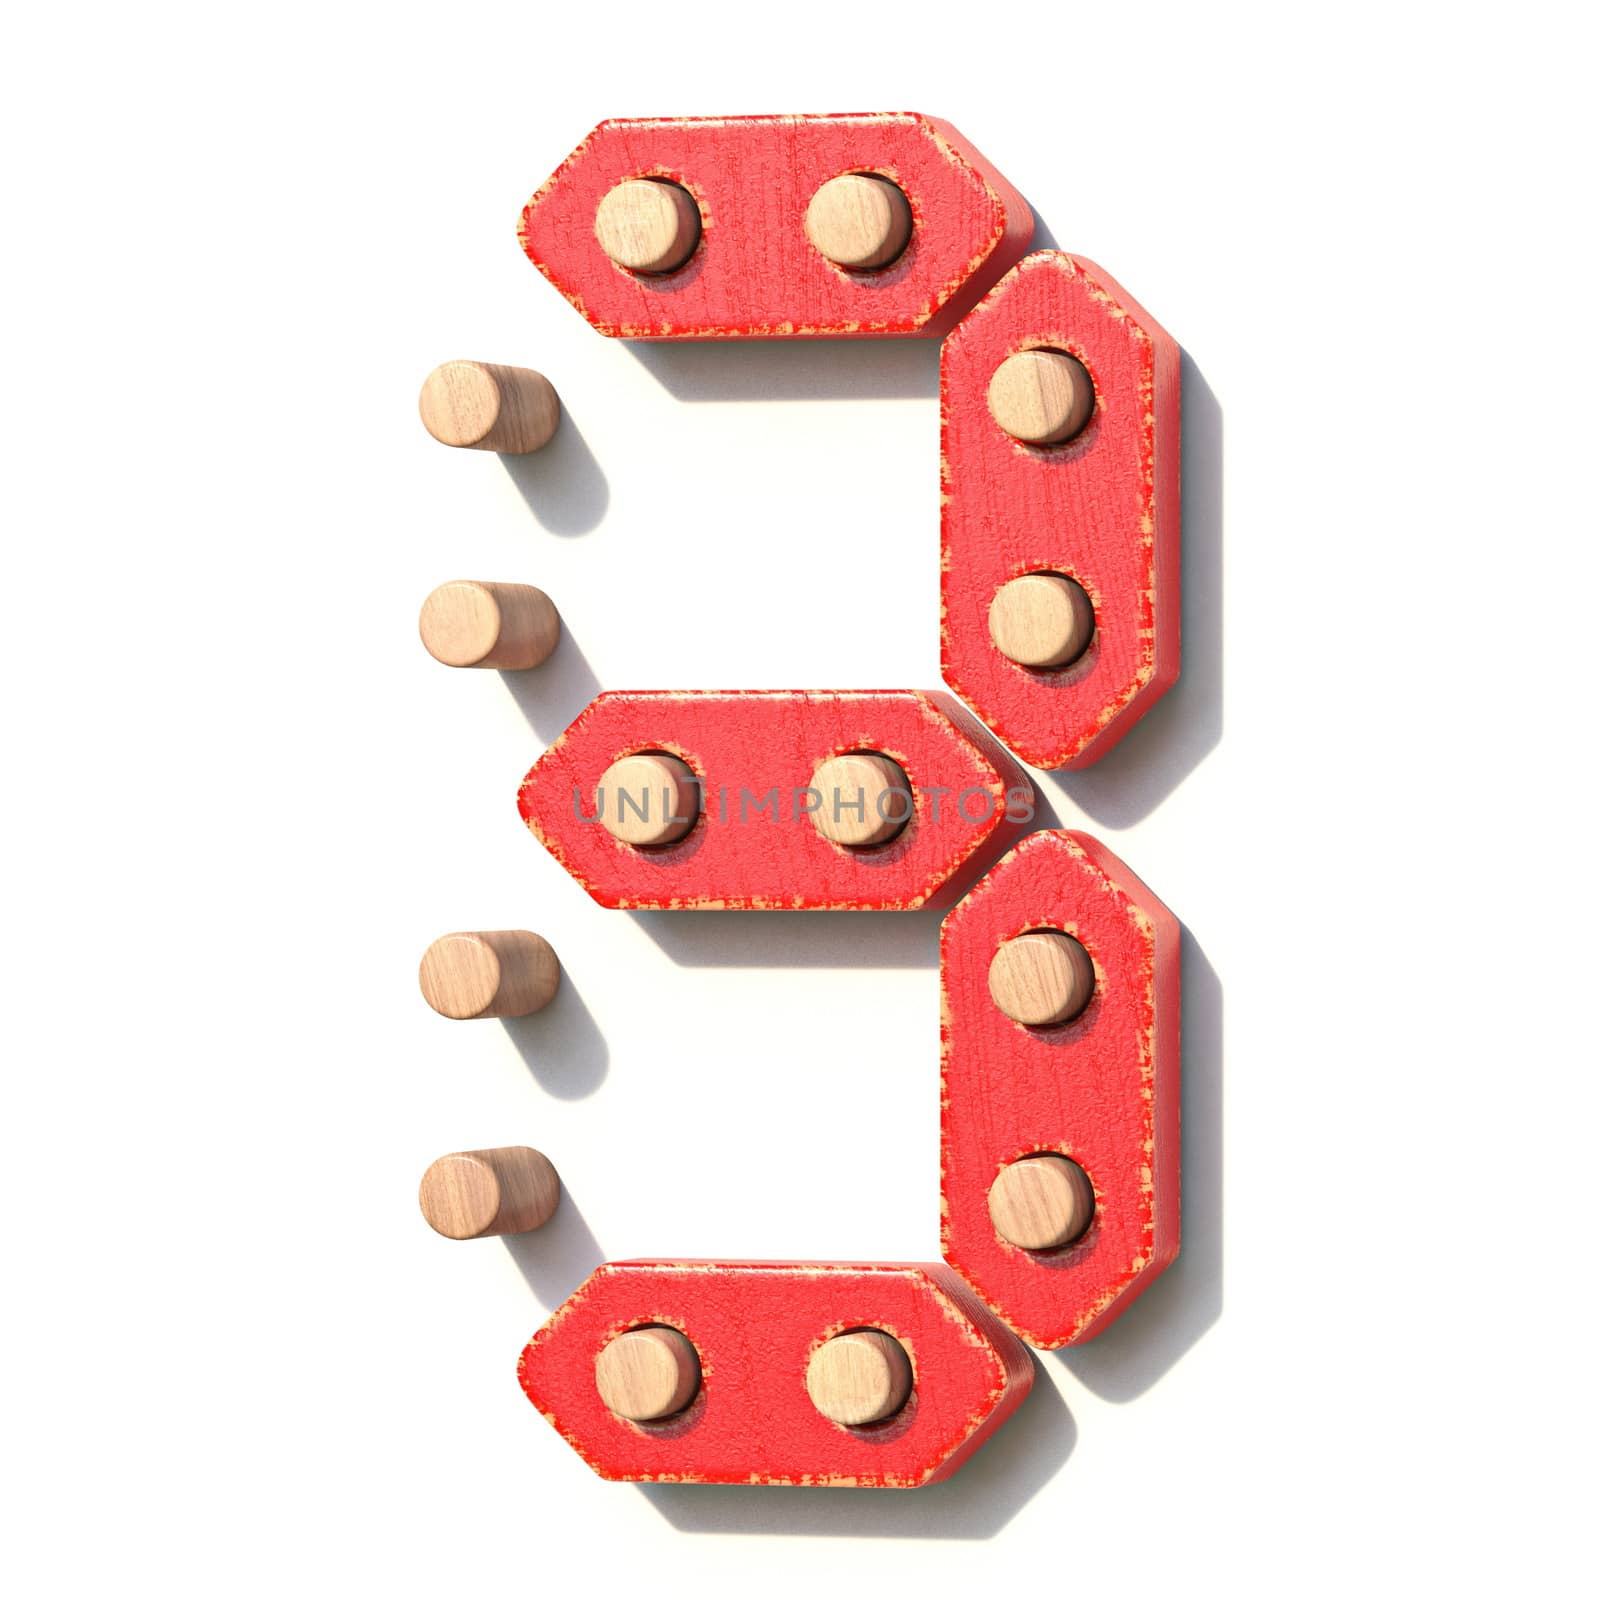 Wooden toy red digital number 3 THREE 3D by djmilic